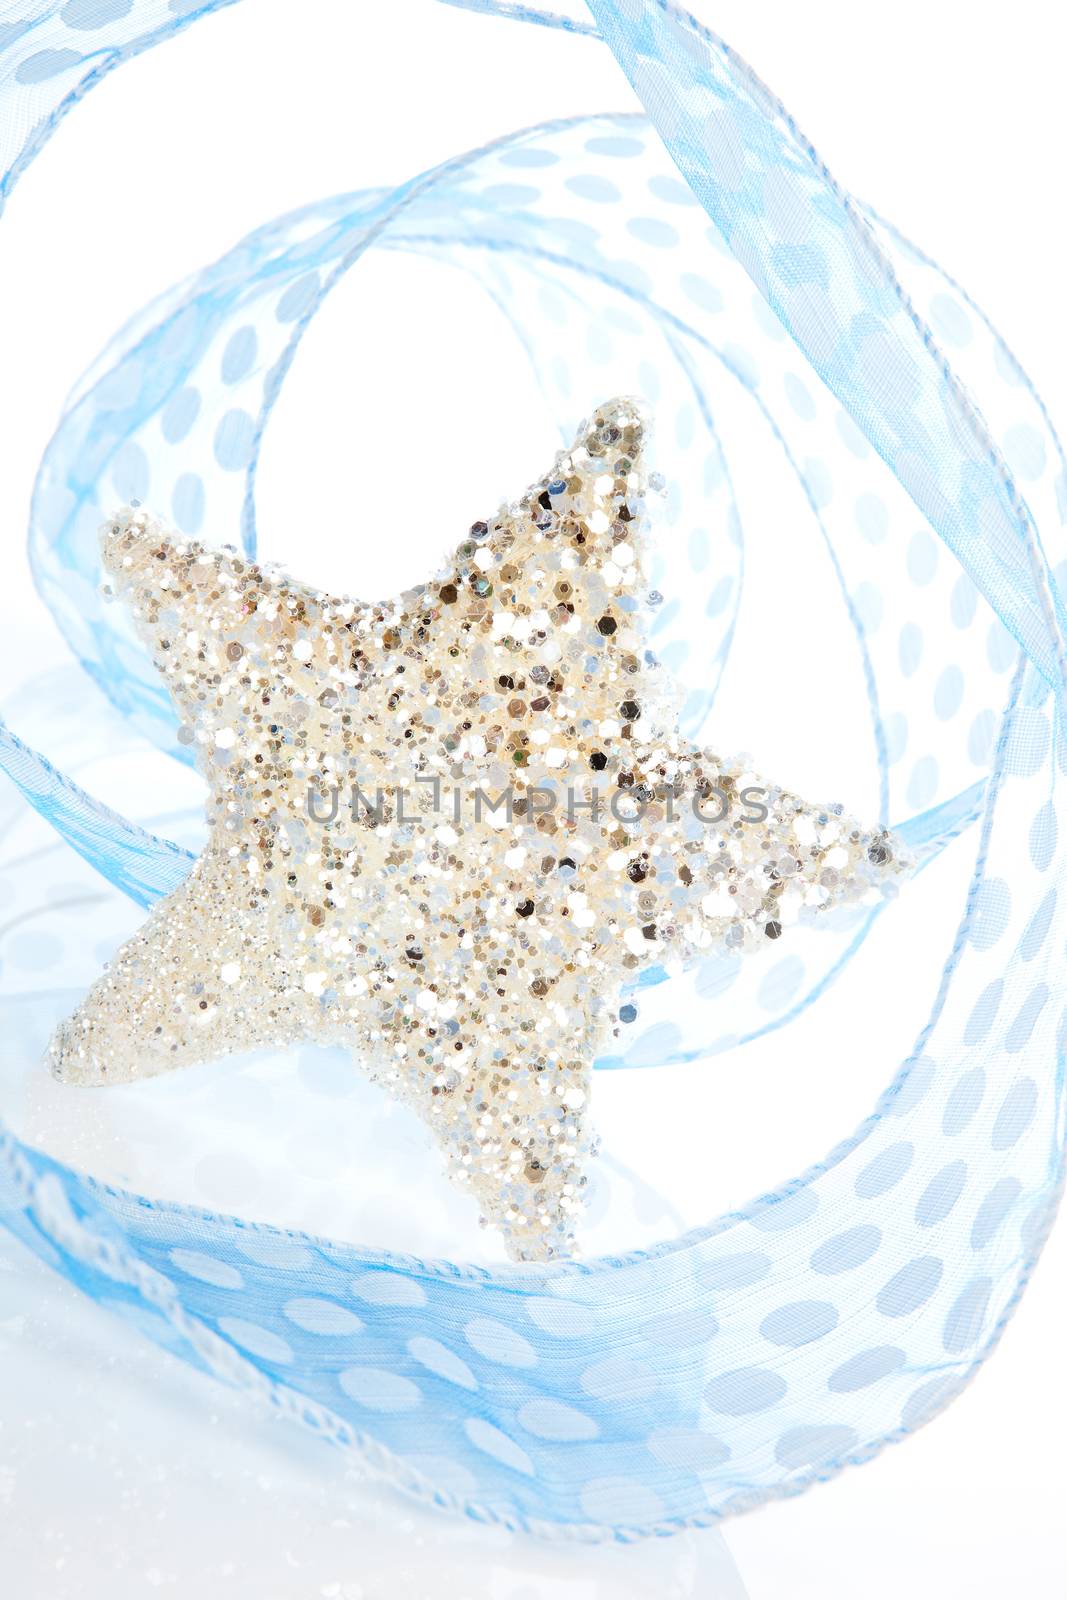 Silver and blue shiny christmas star decoration background. Festive holiday season concept.